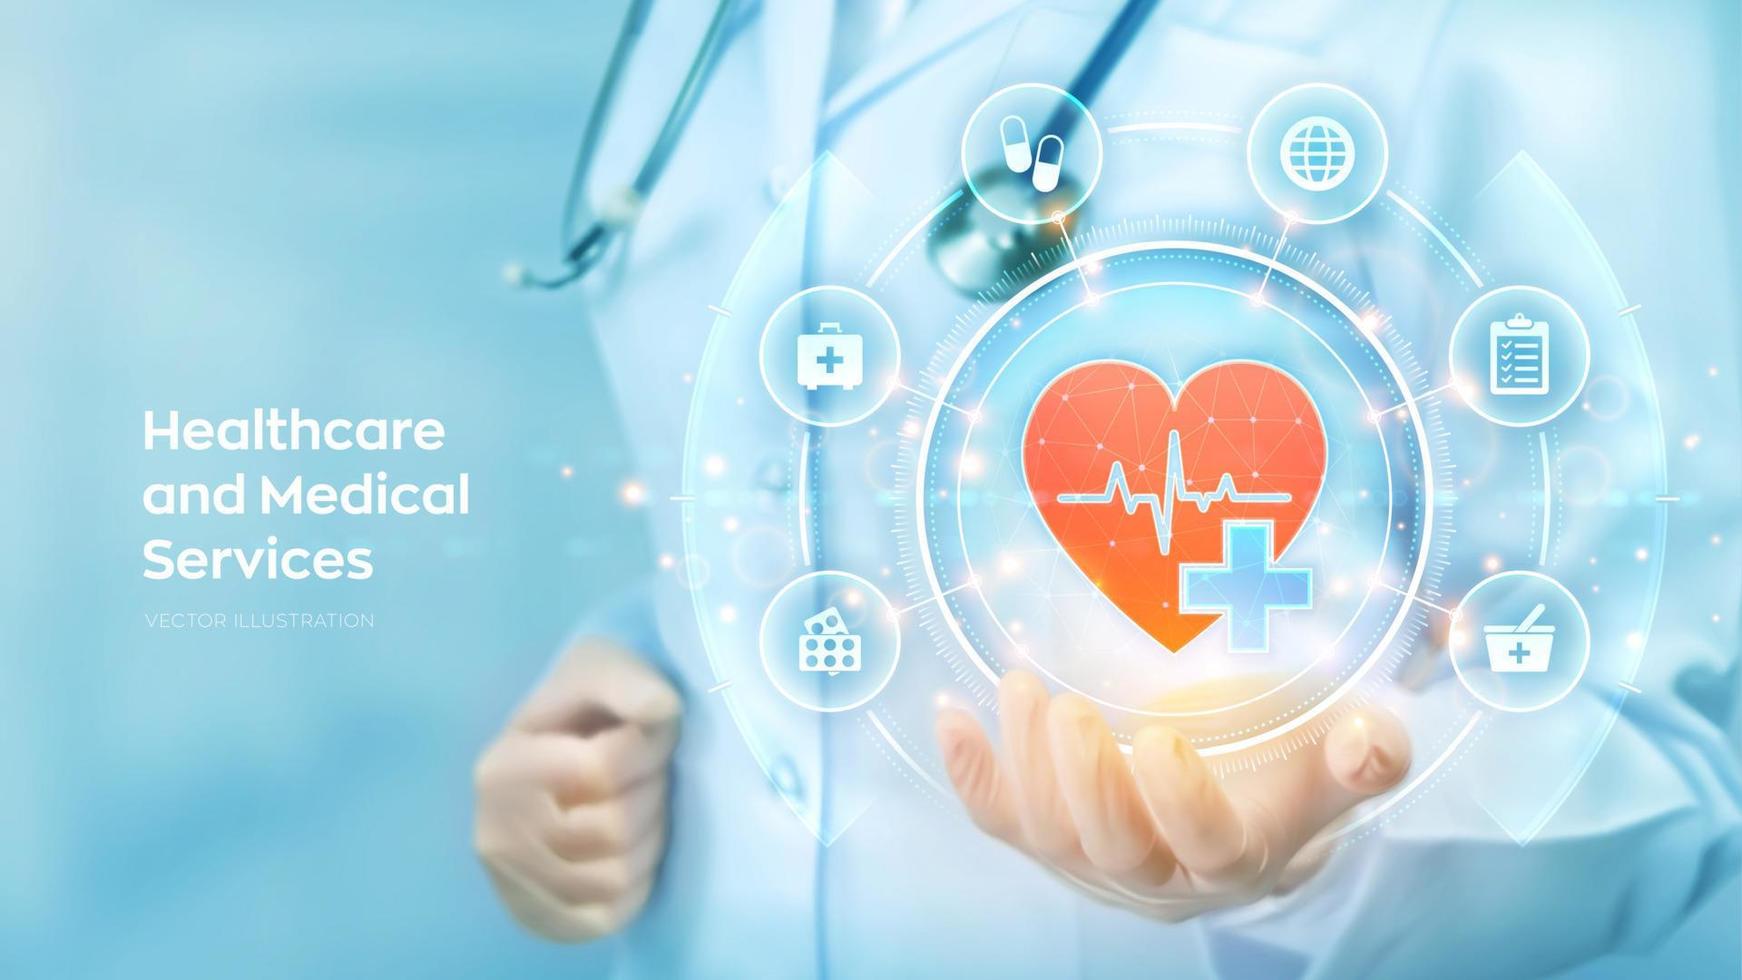 Healthcare, Medical services. Doctor holding in hand red heart shape and medical icon network connection on virtual screen. Health care, Medicine technology network concept. Vector illustration.